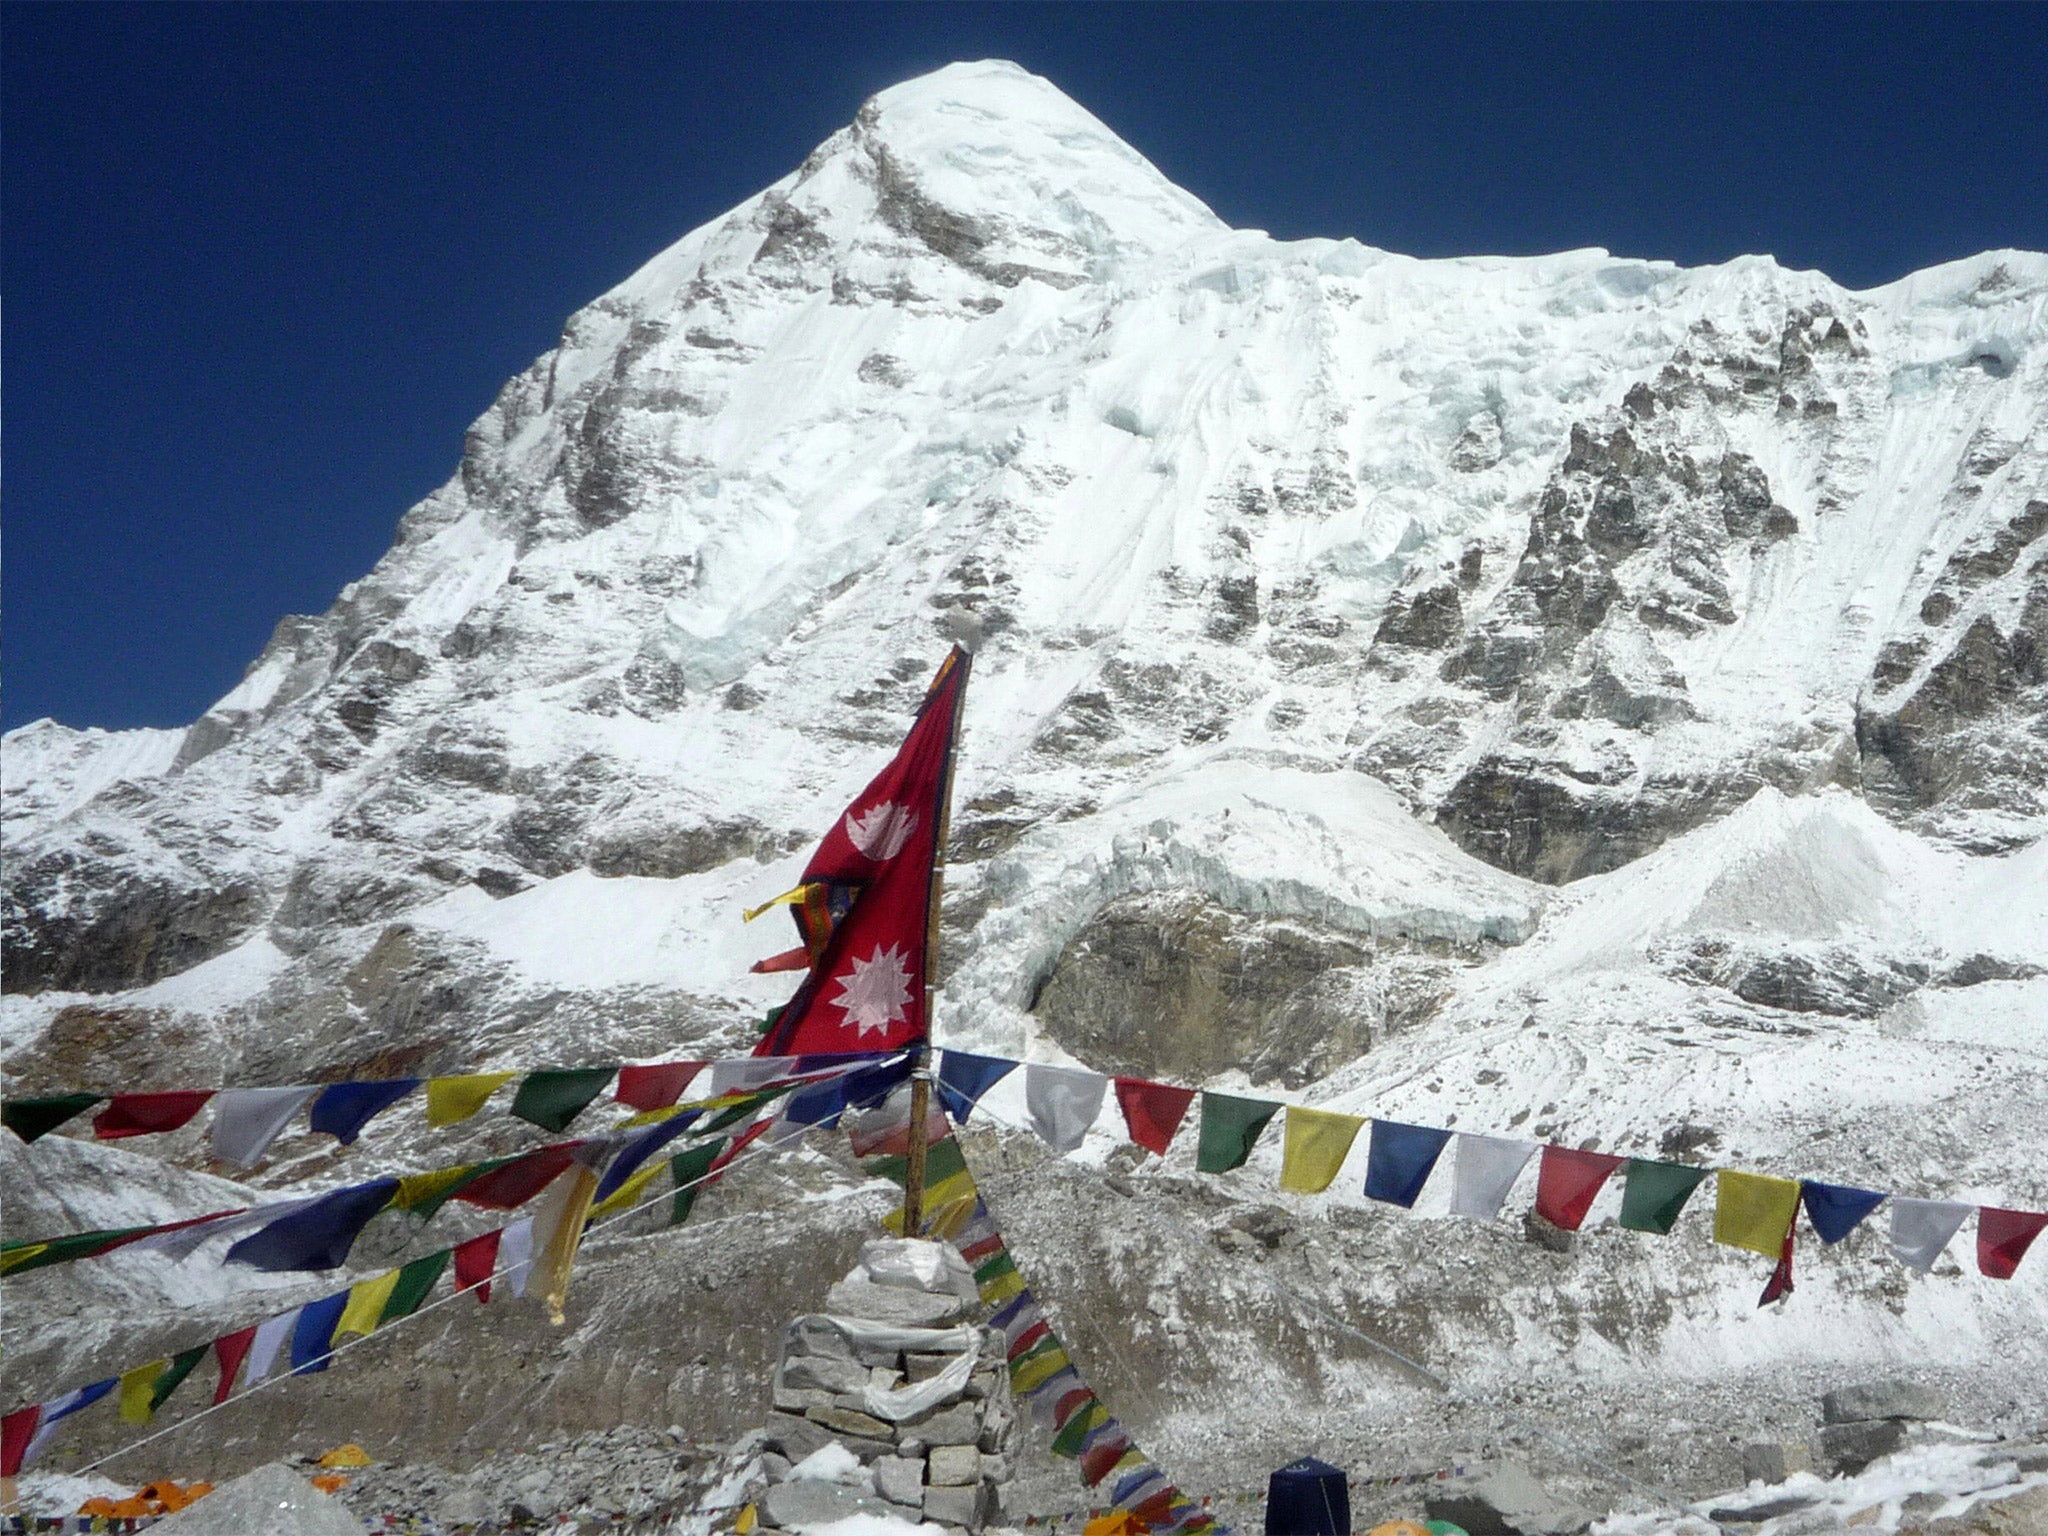 The Everest Base Camp uses the same satellite technology that will be implemented in North Yorkshire